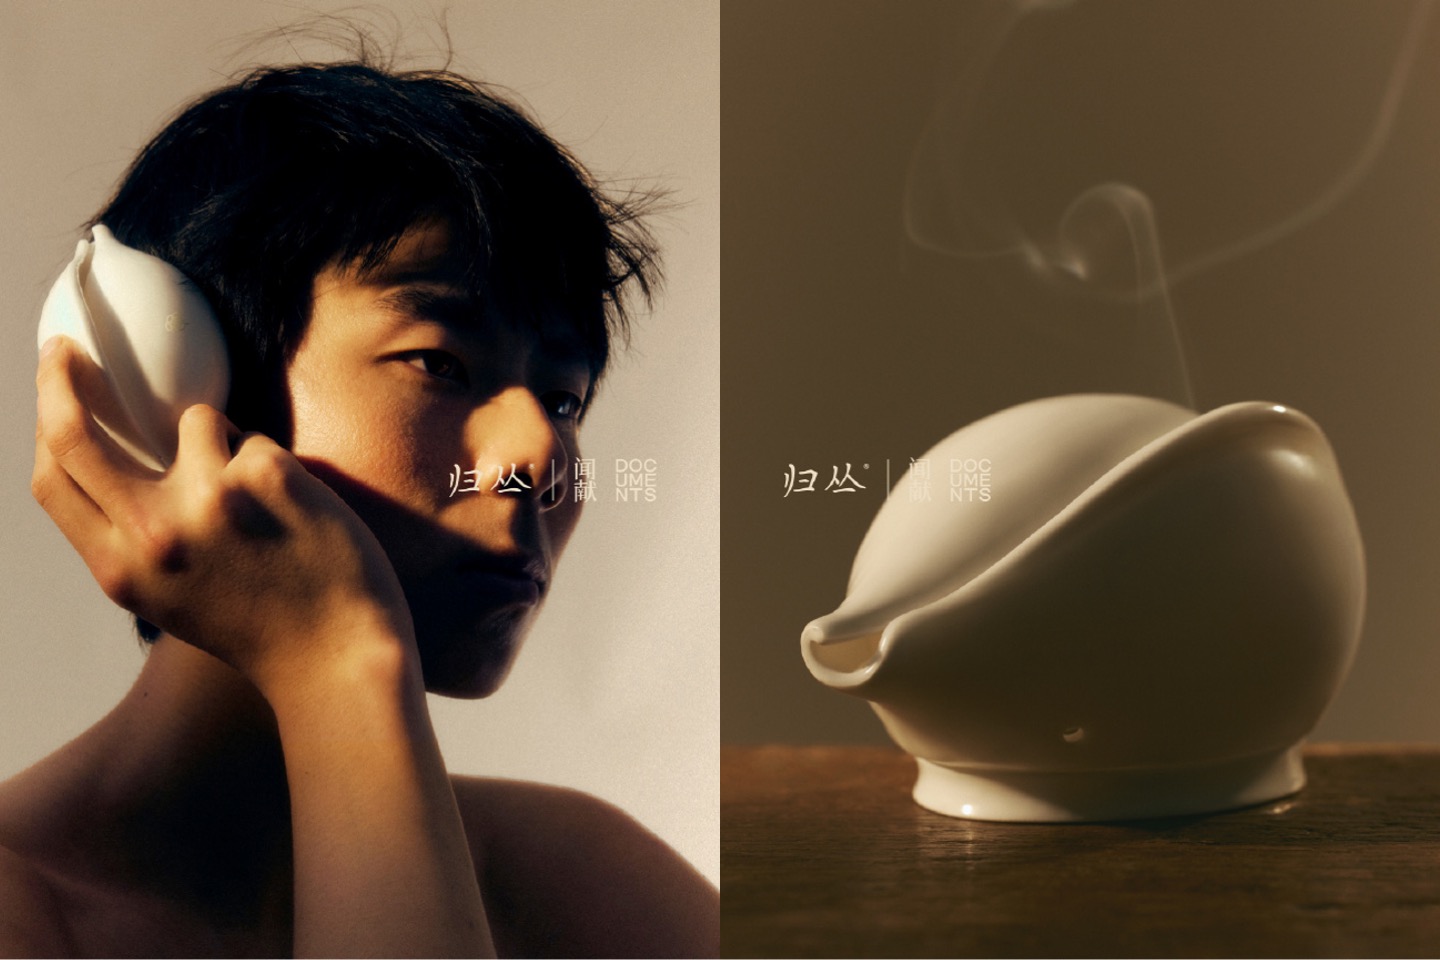 Two images: man holding conch shell to ear, and conch-shaped incense burner